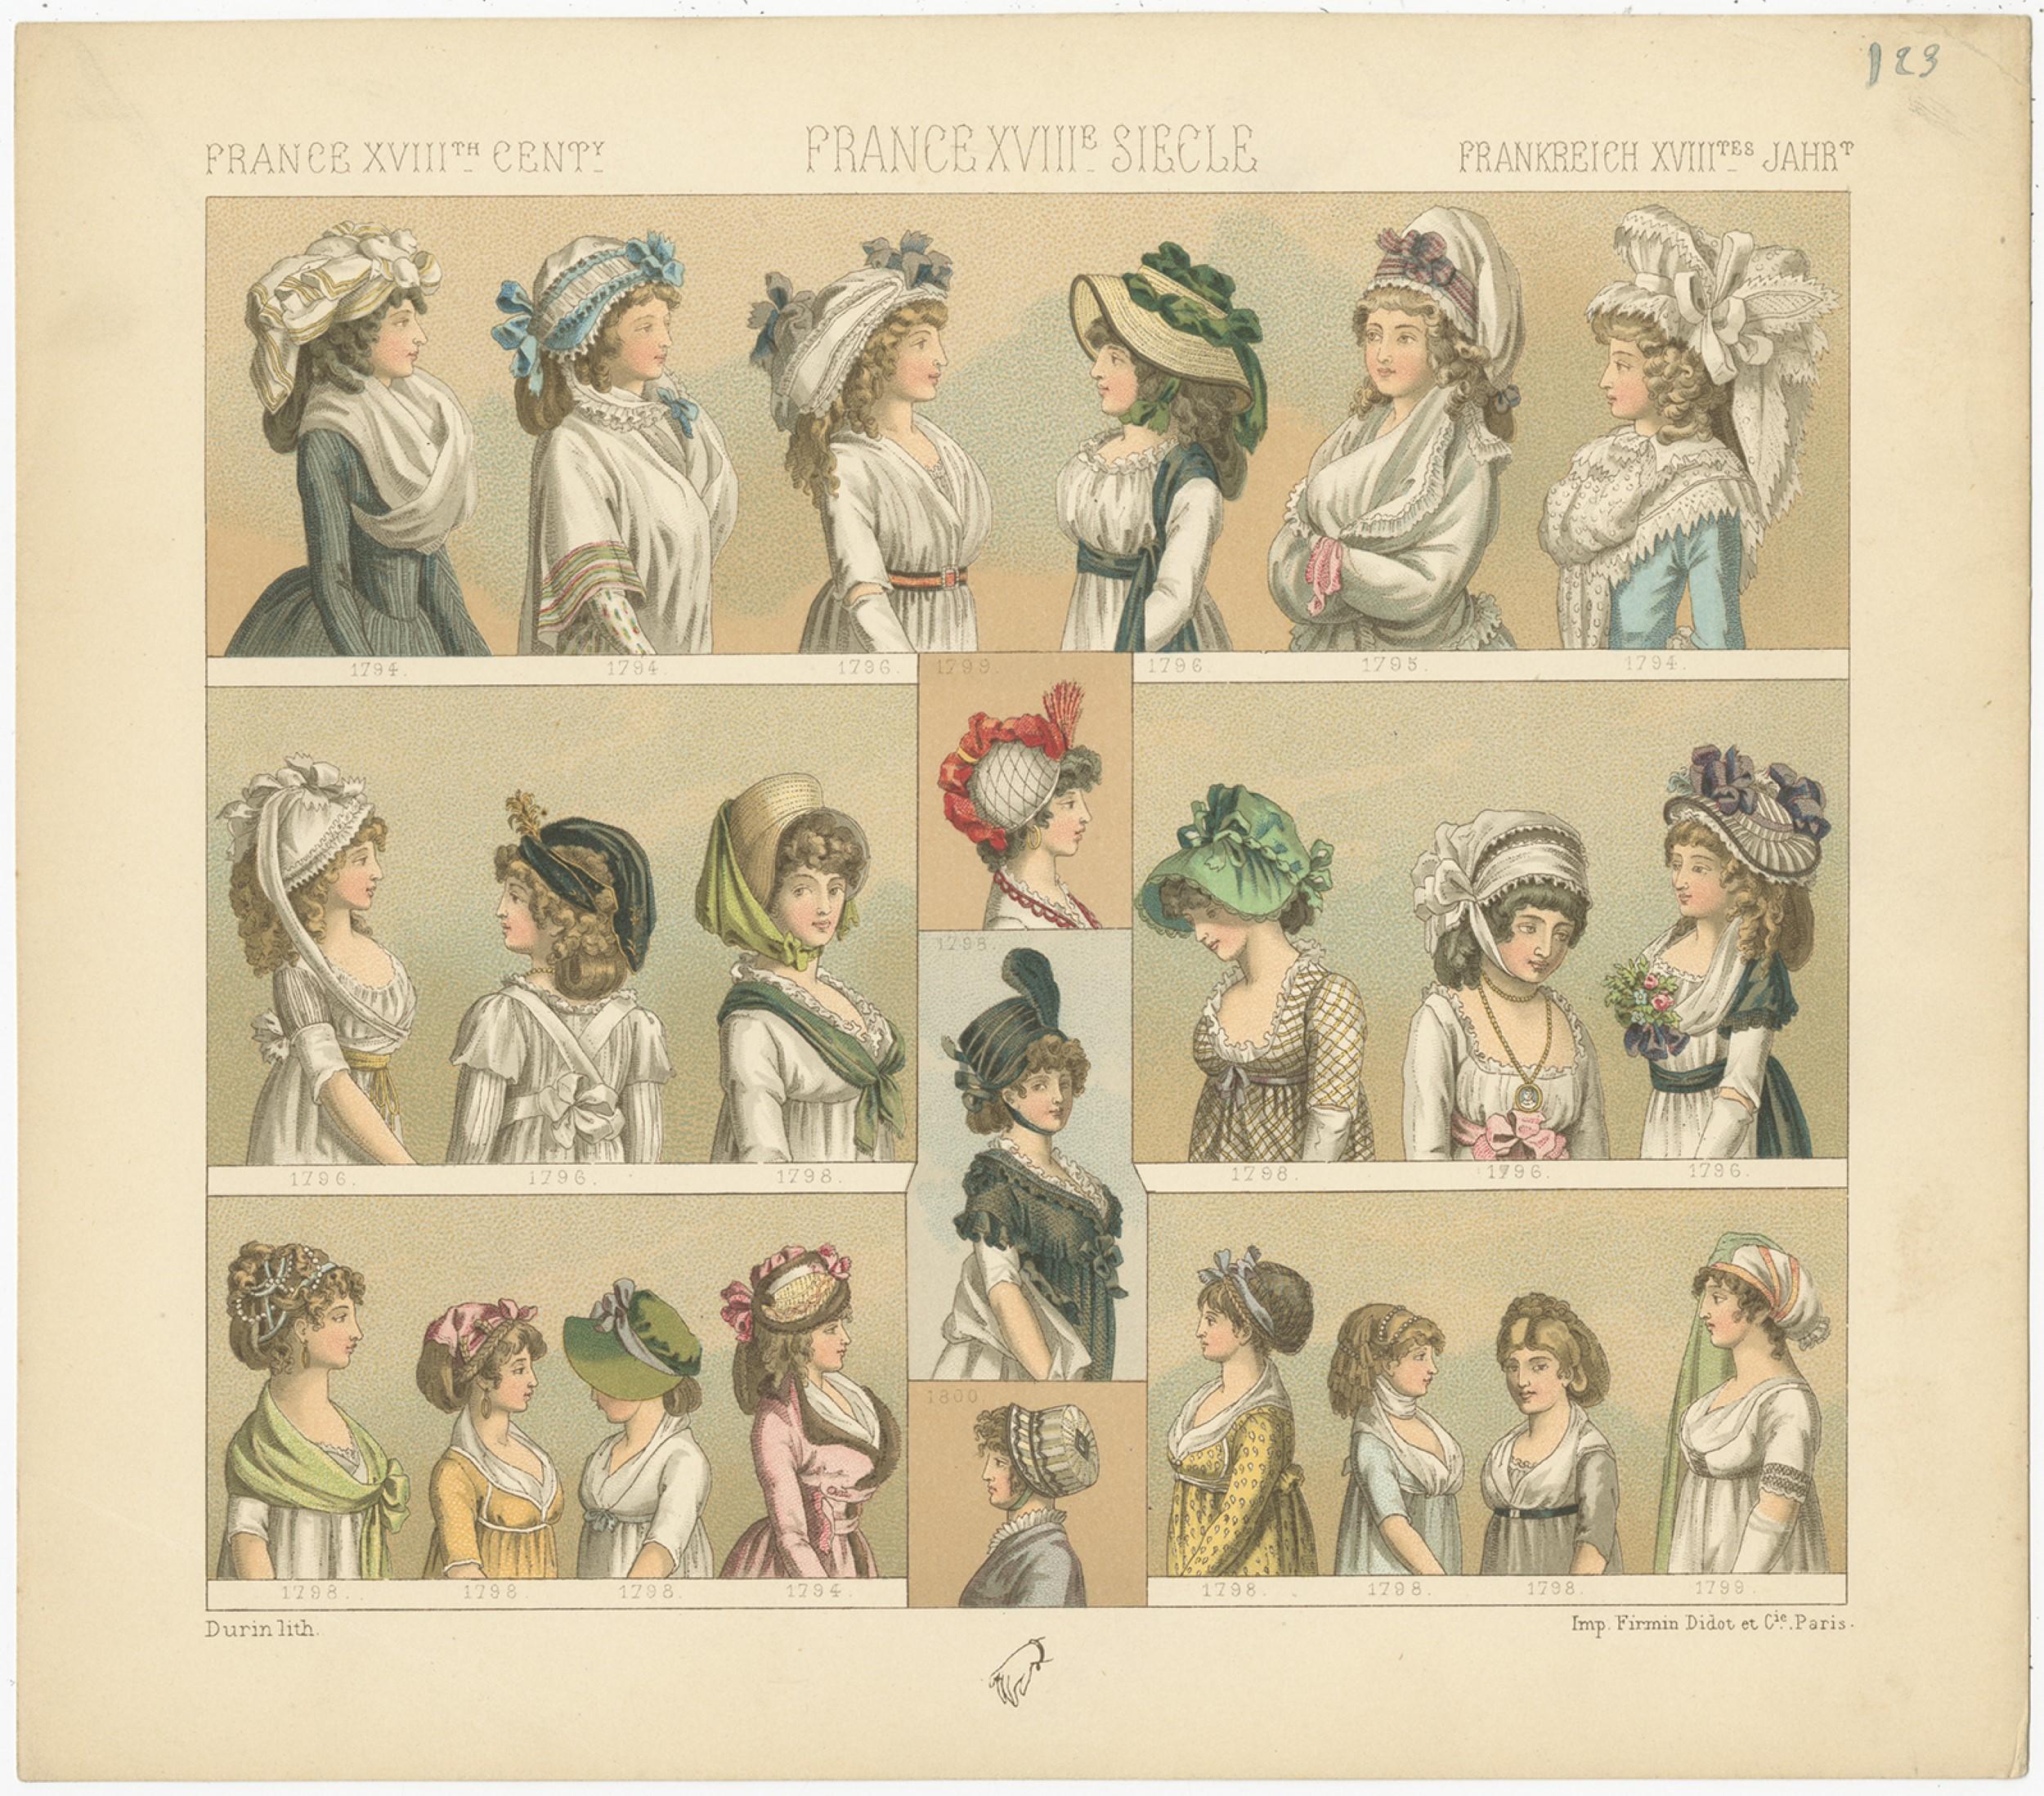 Antique print titled 'France XVIIIth Cent - France XVIIIe, Siecle - Frankreich XVIIItes Jahr'. Chromolithograph of French 18th century women's costumes. This print originates from 'Le Costume Historique' by M.A. Racinet. Published, circa 1880.
 
  